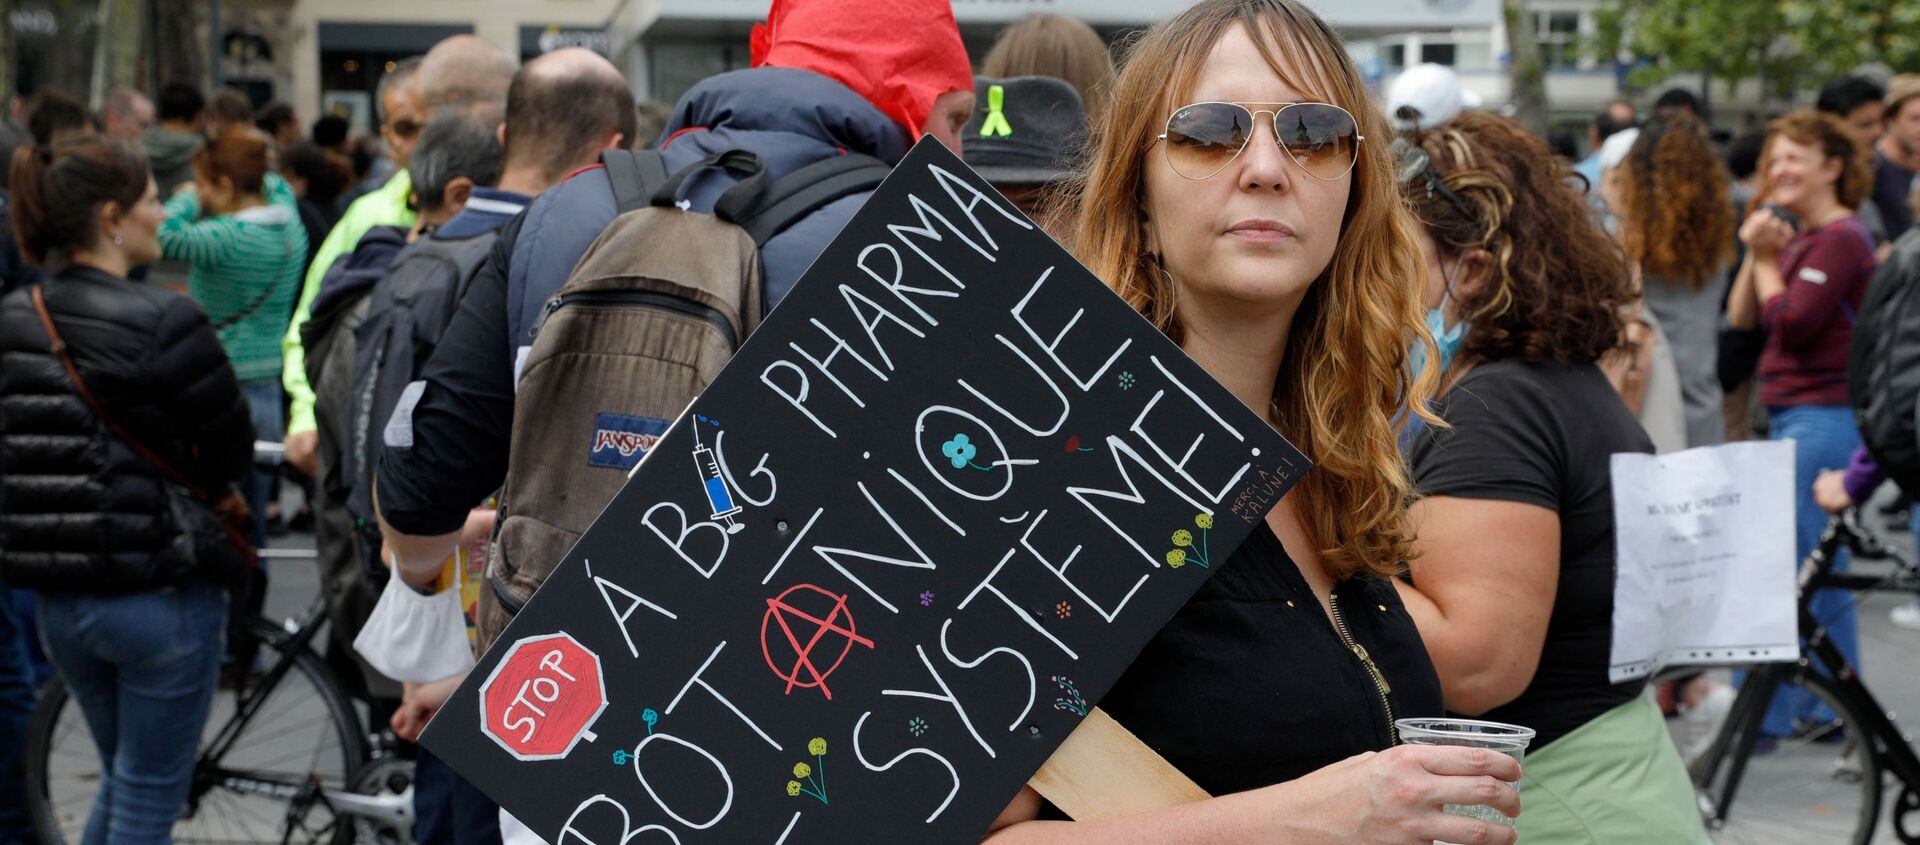 A woman holds a placard hostile to Pharmaceutical firms as she takes part in a gathering at Republic square in Paris on July 14, 2021 to protest against a governmental decision to impose Covid-19 tests for unvaccinated people who want to eat in restaurants or take long-distance trips, as the country looks to avoid a surge in more contagious Delta cases.  - Sputnik International, 1920, 17.07.2021